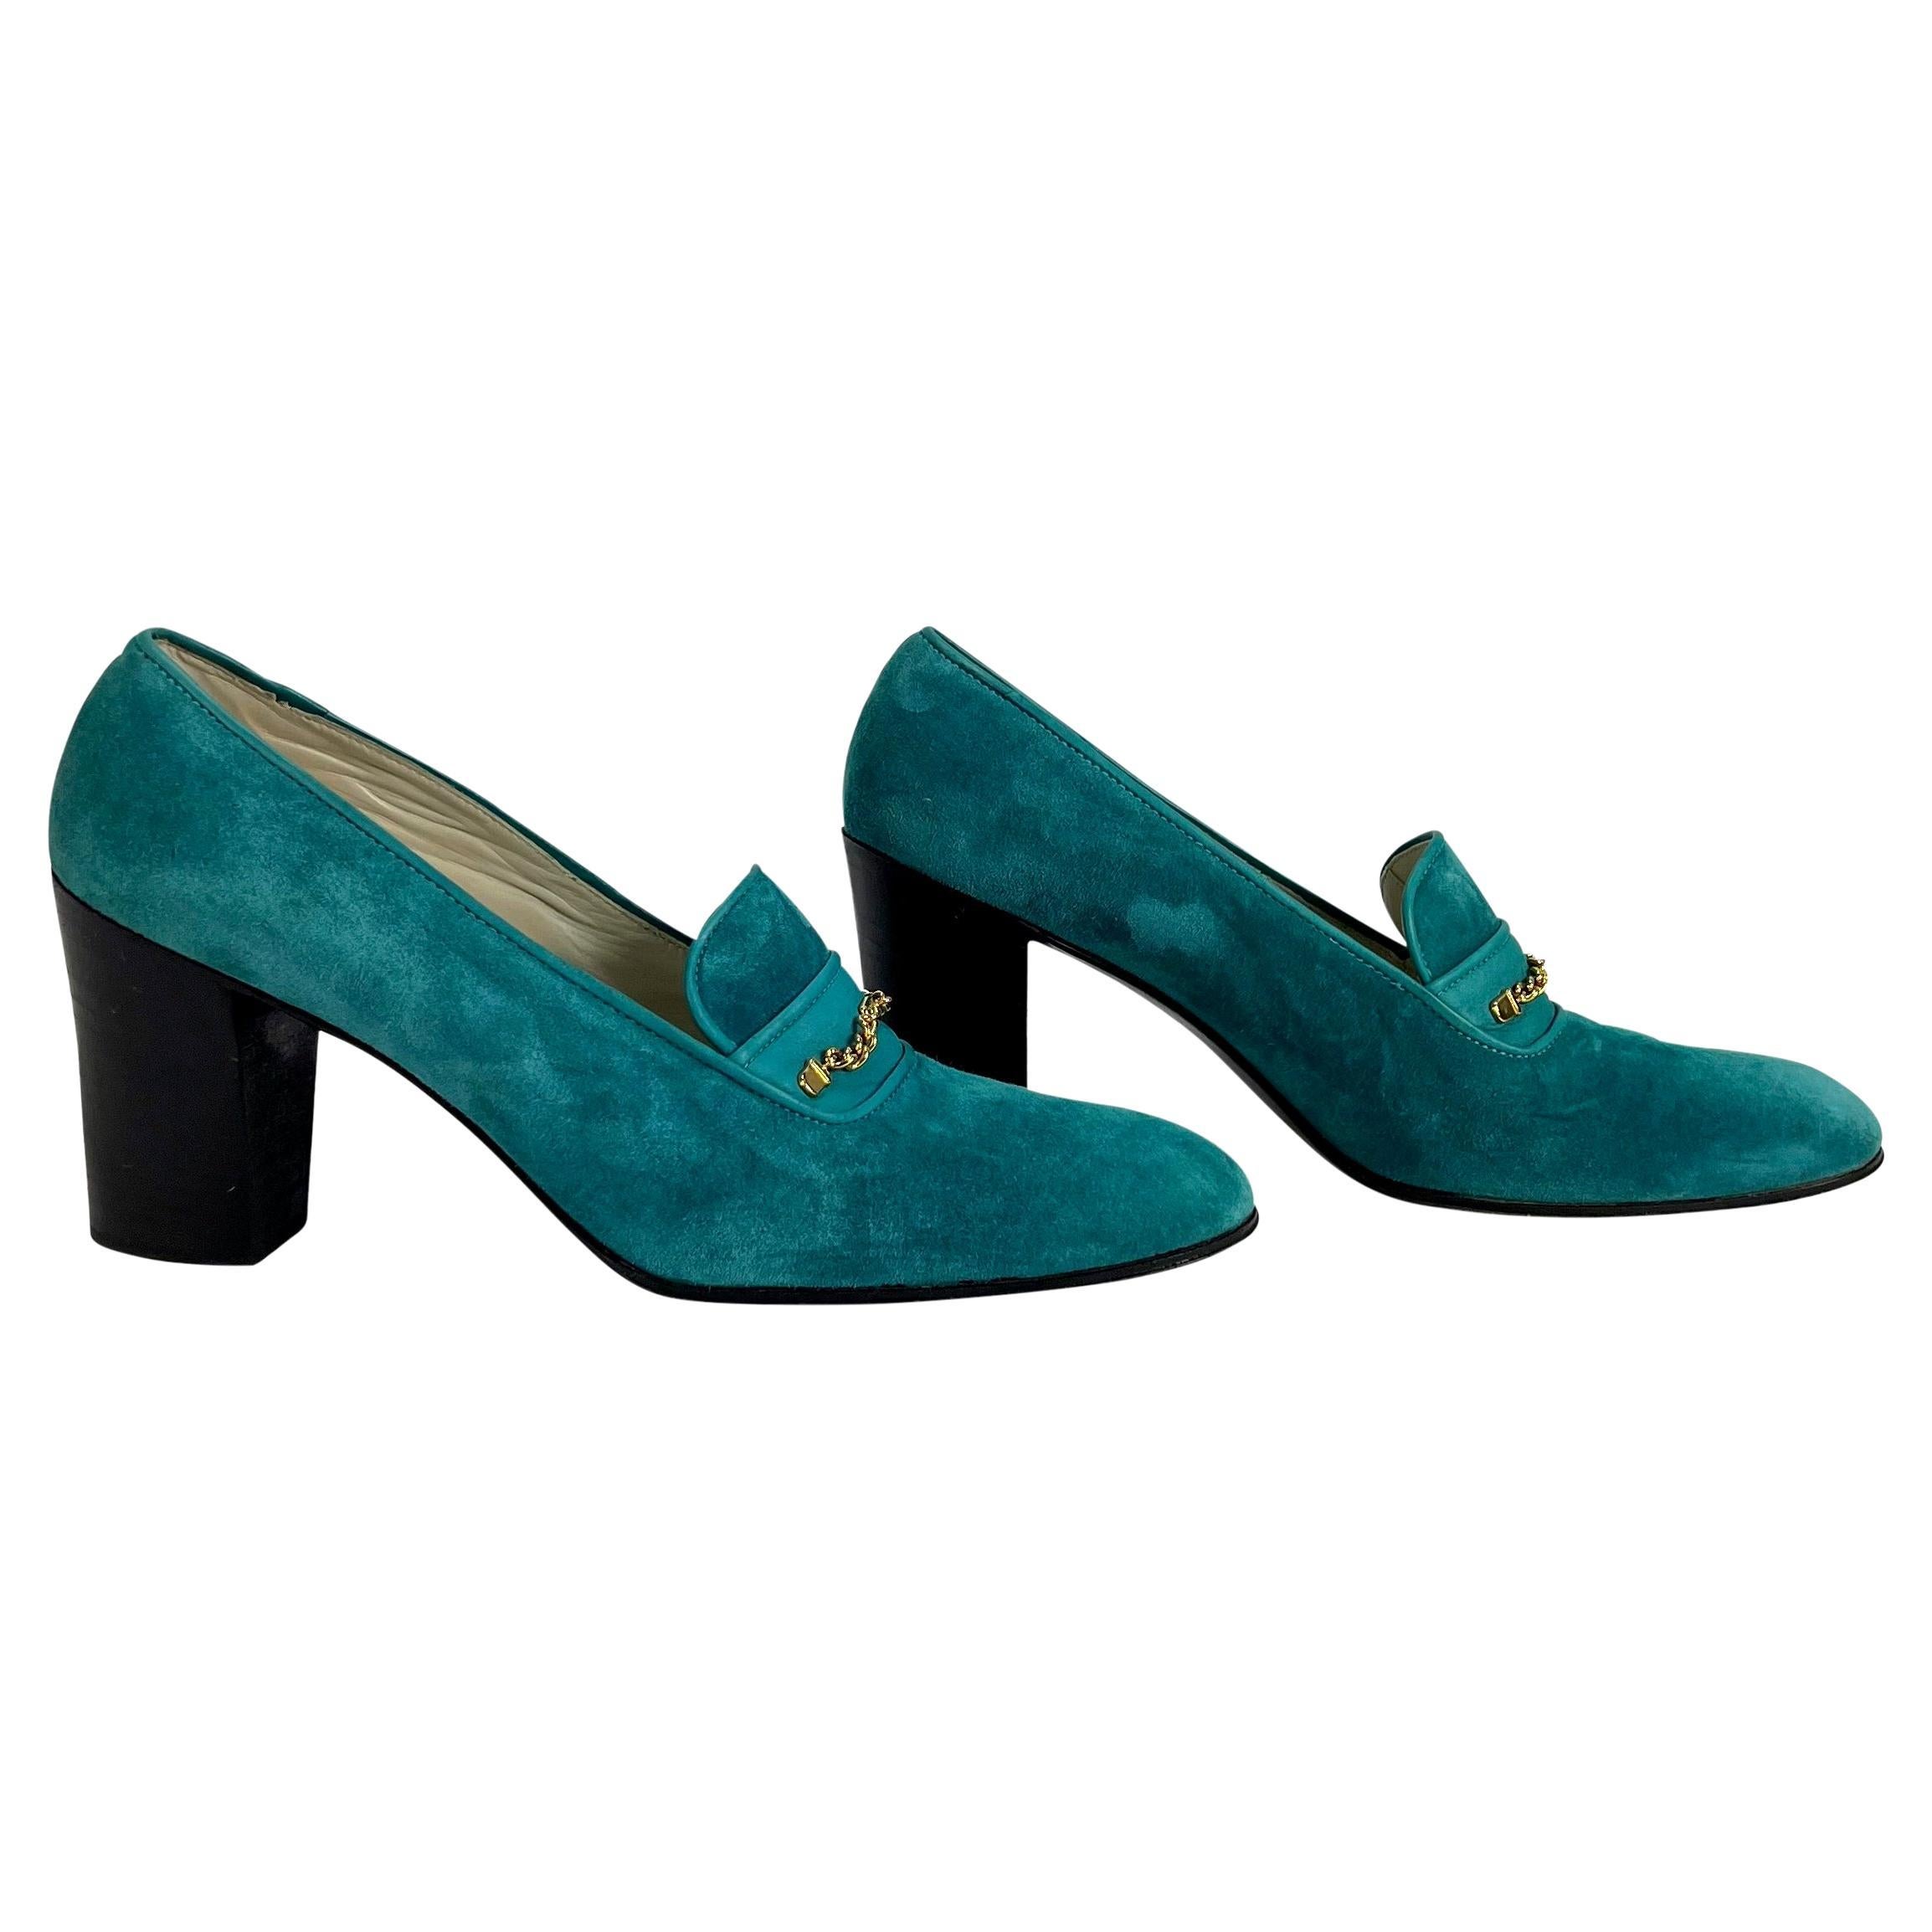 Presenting a fabulous pair of teal suede Gucci loafer heels. From the 1970s, this incredible pair of heels features a square toe and is complete with a gold chain detail with Gucci's 'GG' monogram centrally placed. Includes original Gucci shoe